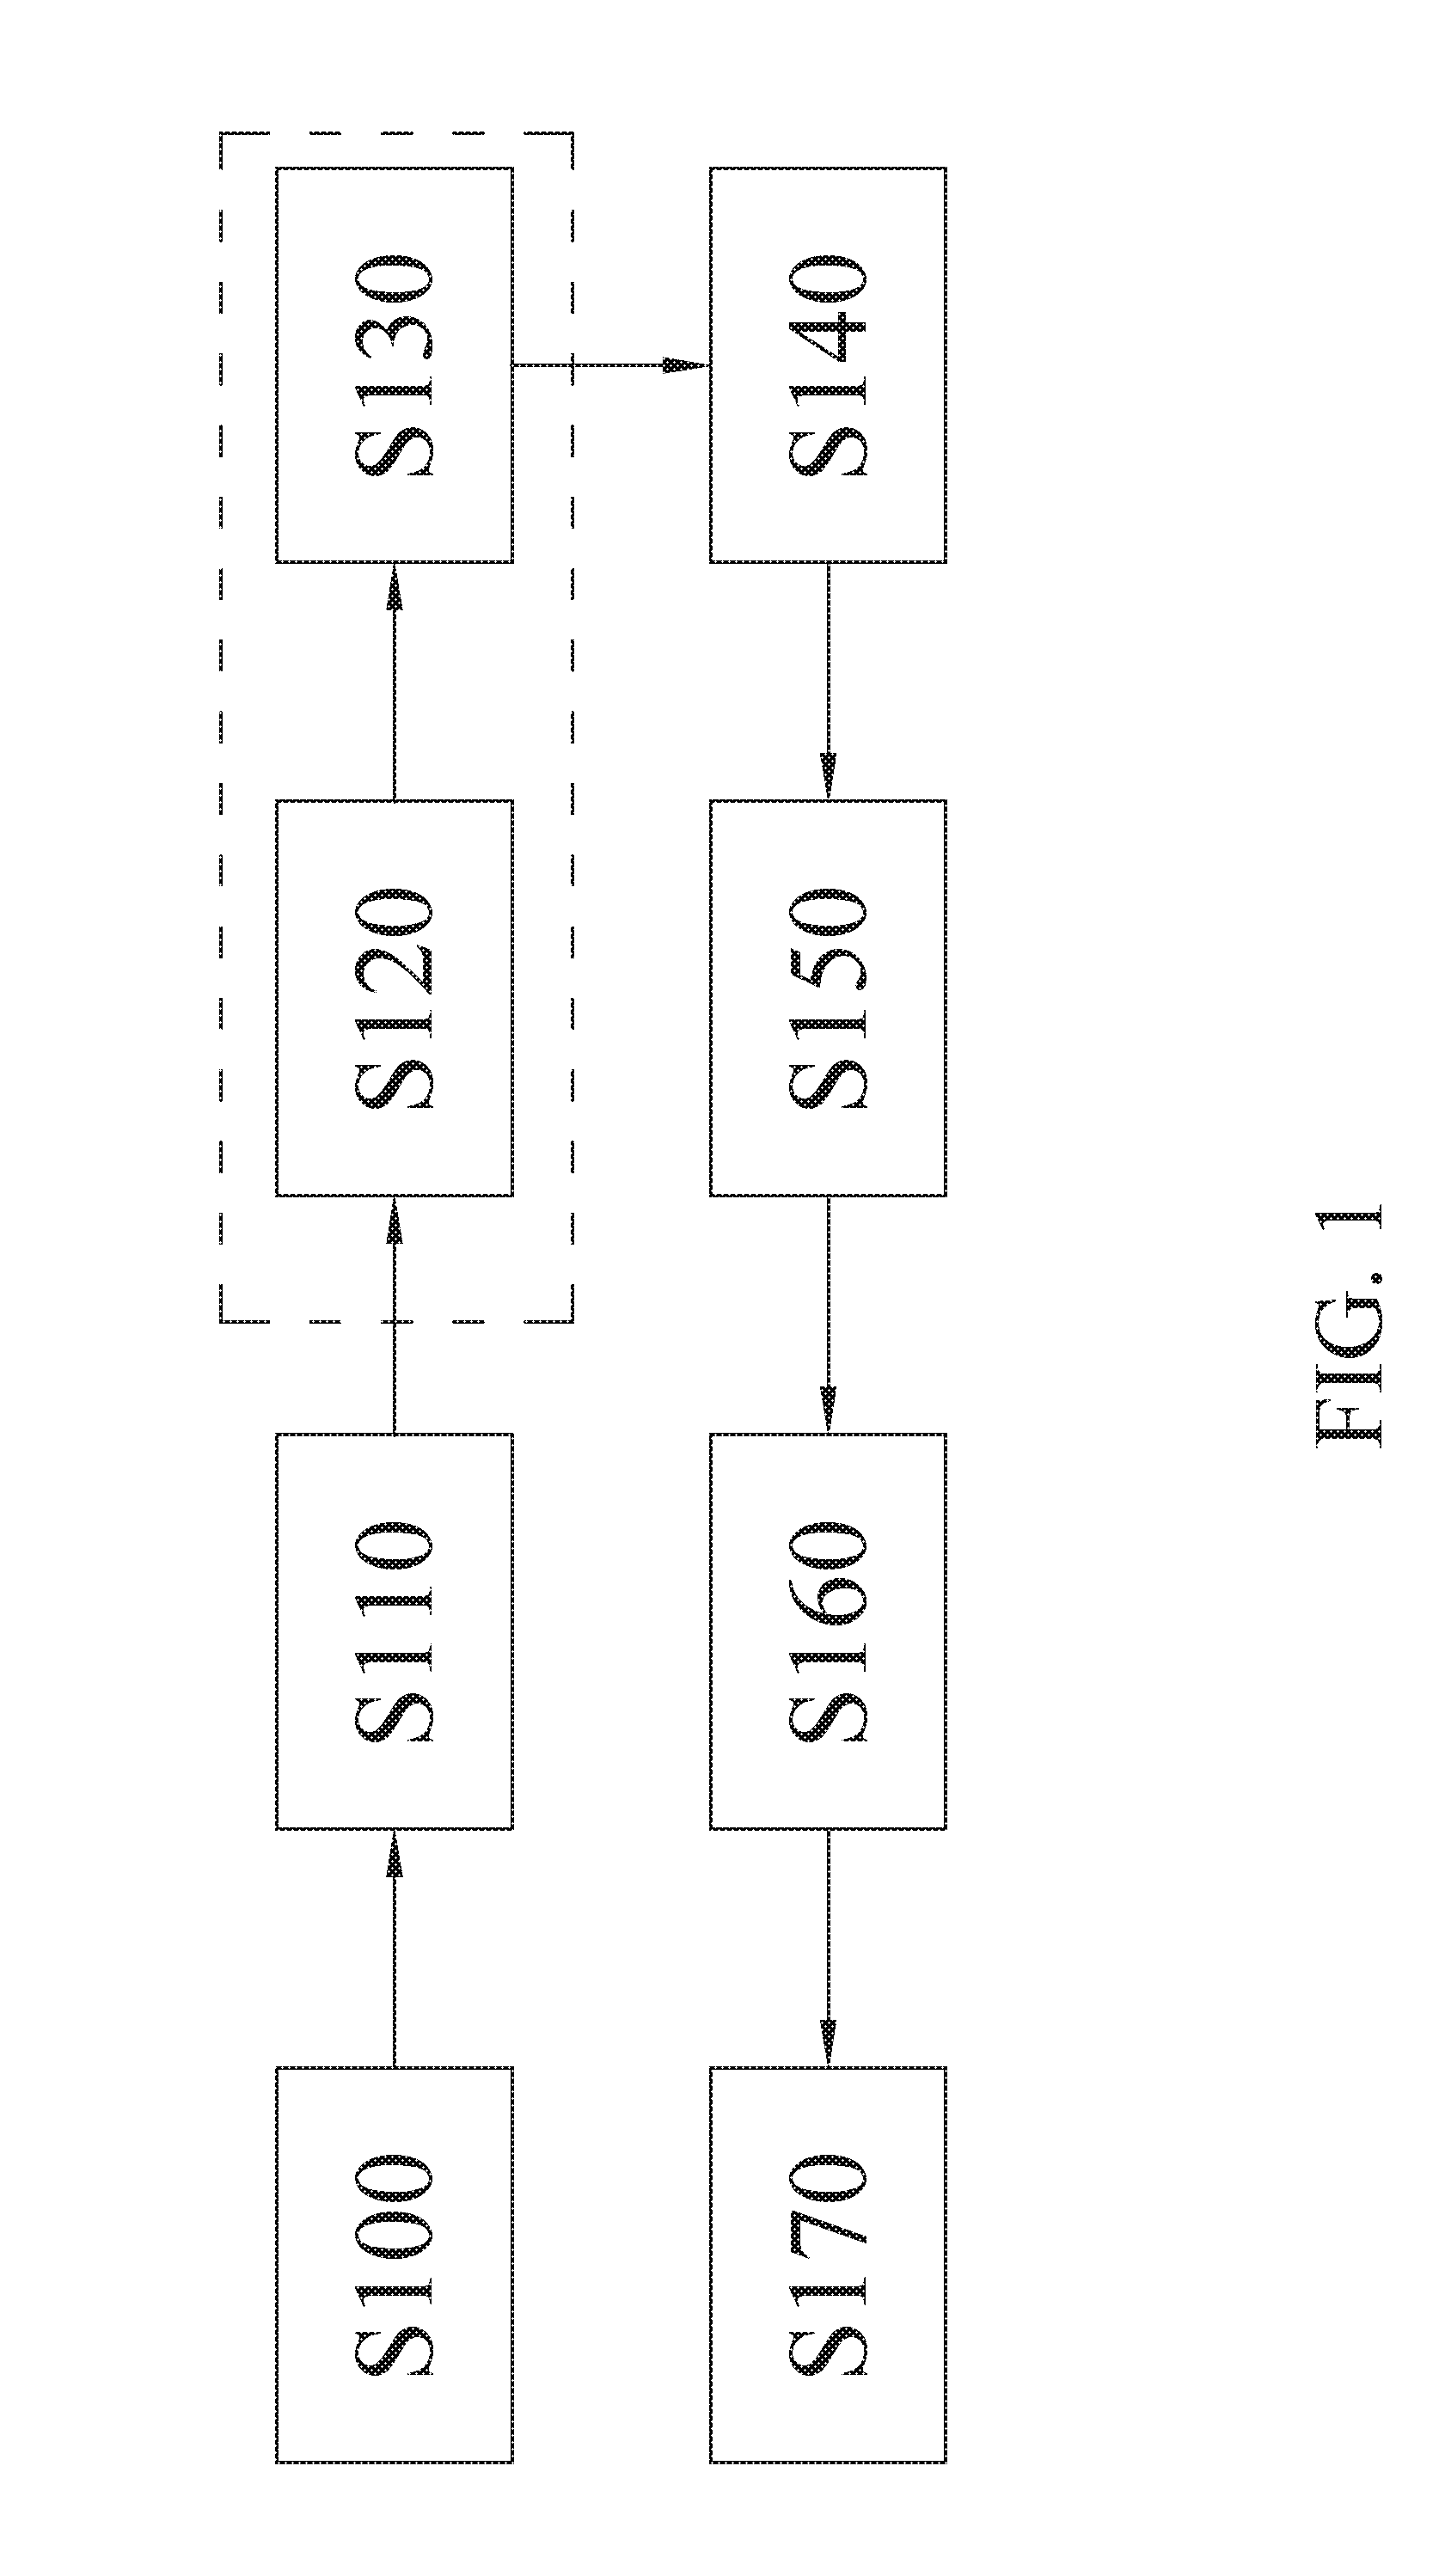 Non-contact method for detecting physiological signal and motion in real time